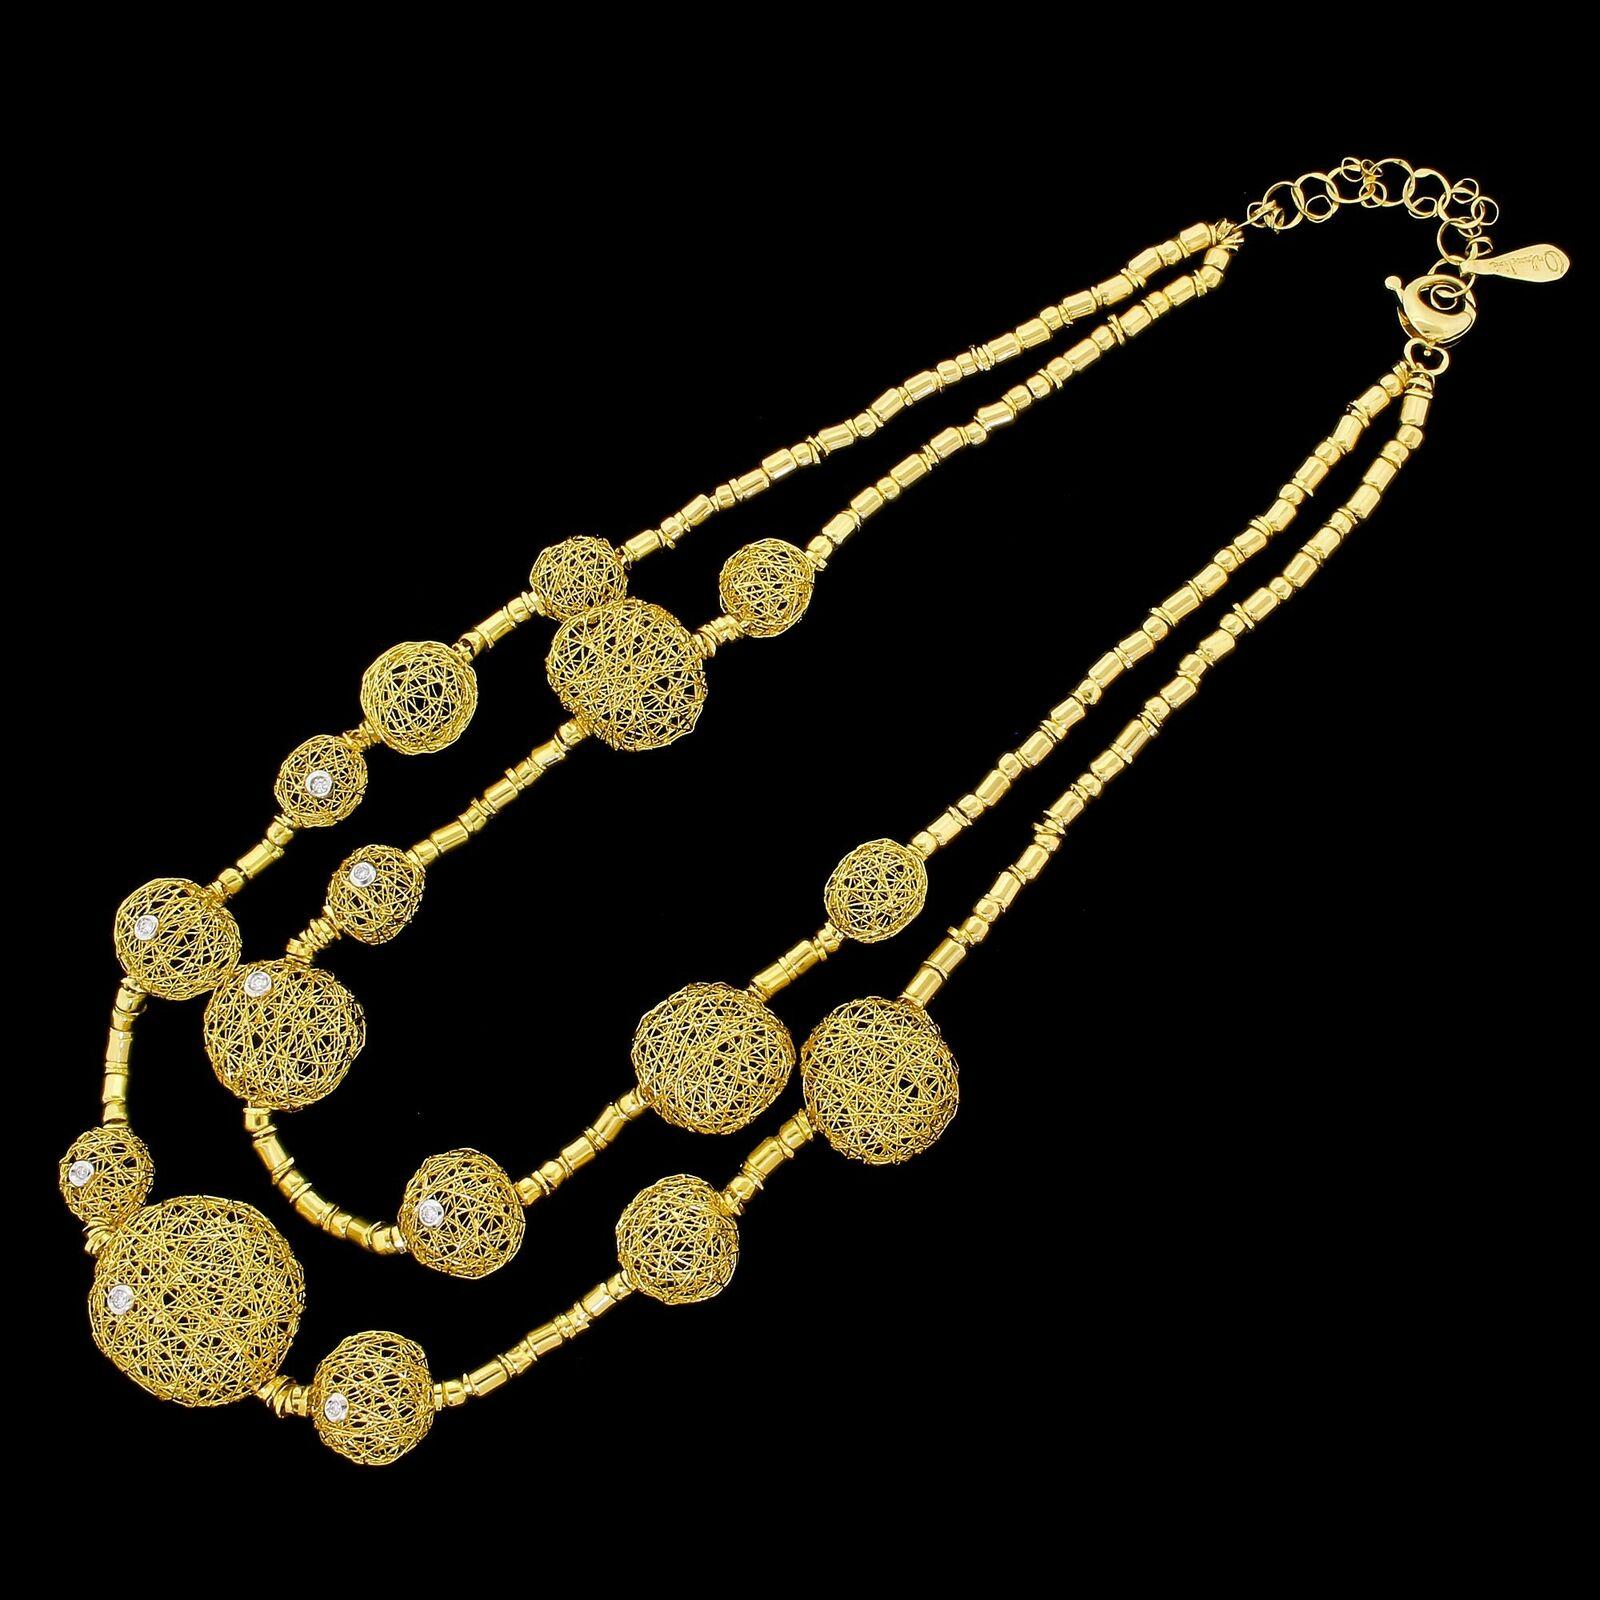 Round Cut Couture Orlando Orlandini 18kt Gold Diamond Lace Sphere Necklace Double Row 76G